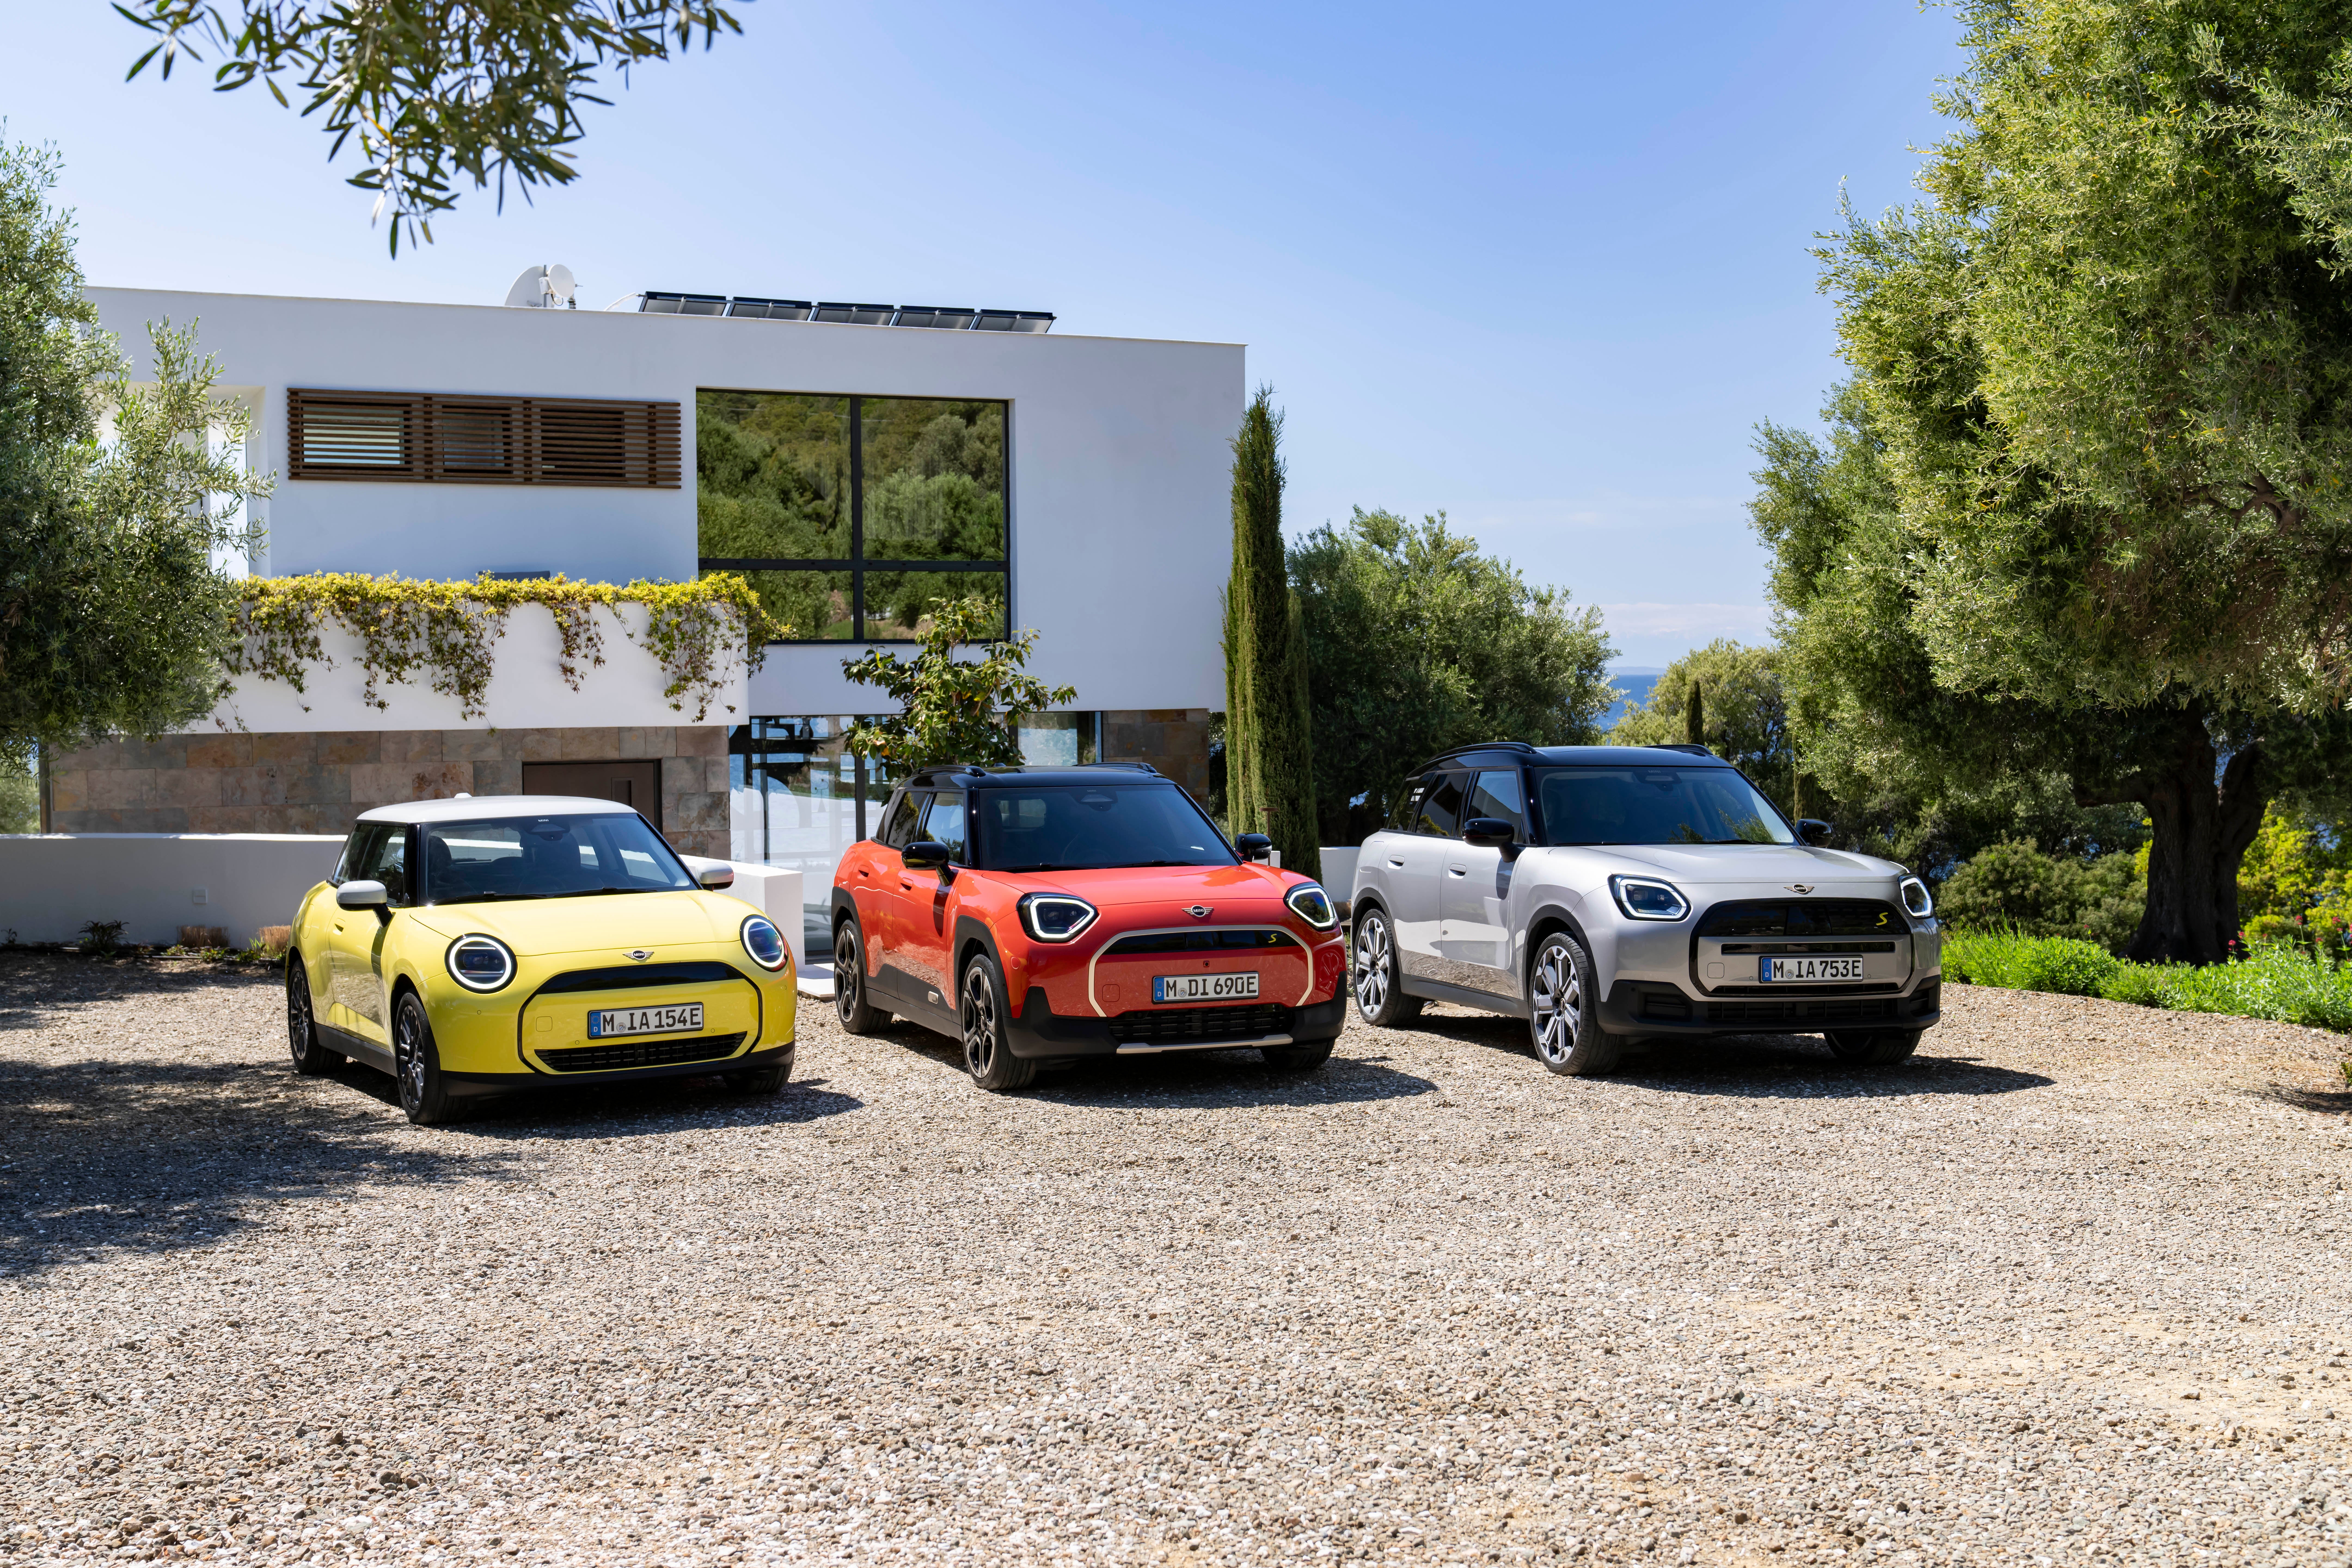 The new Mini family includes the yellow Cooper, orange Aceman and silver Countryman